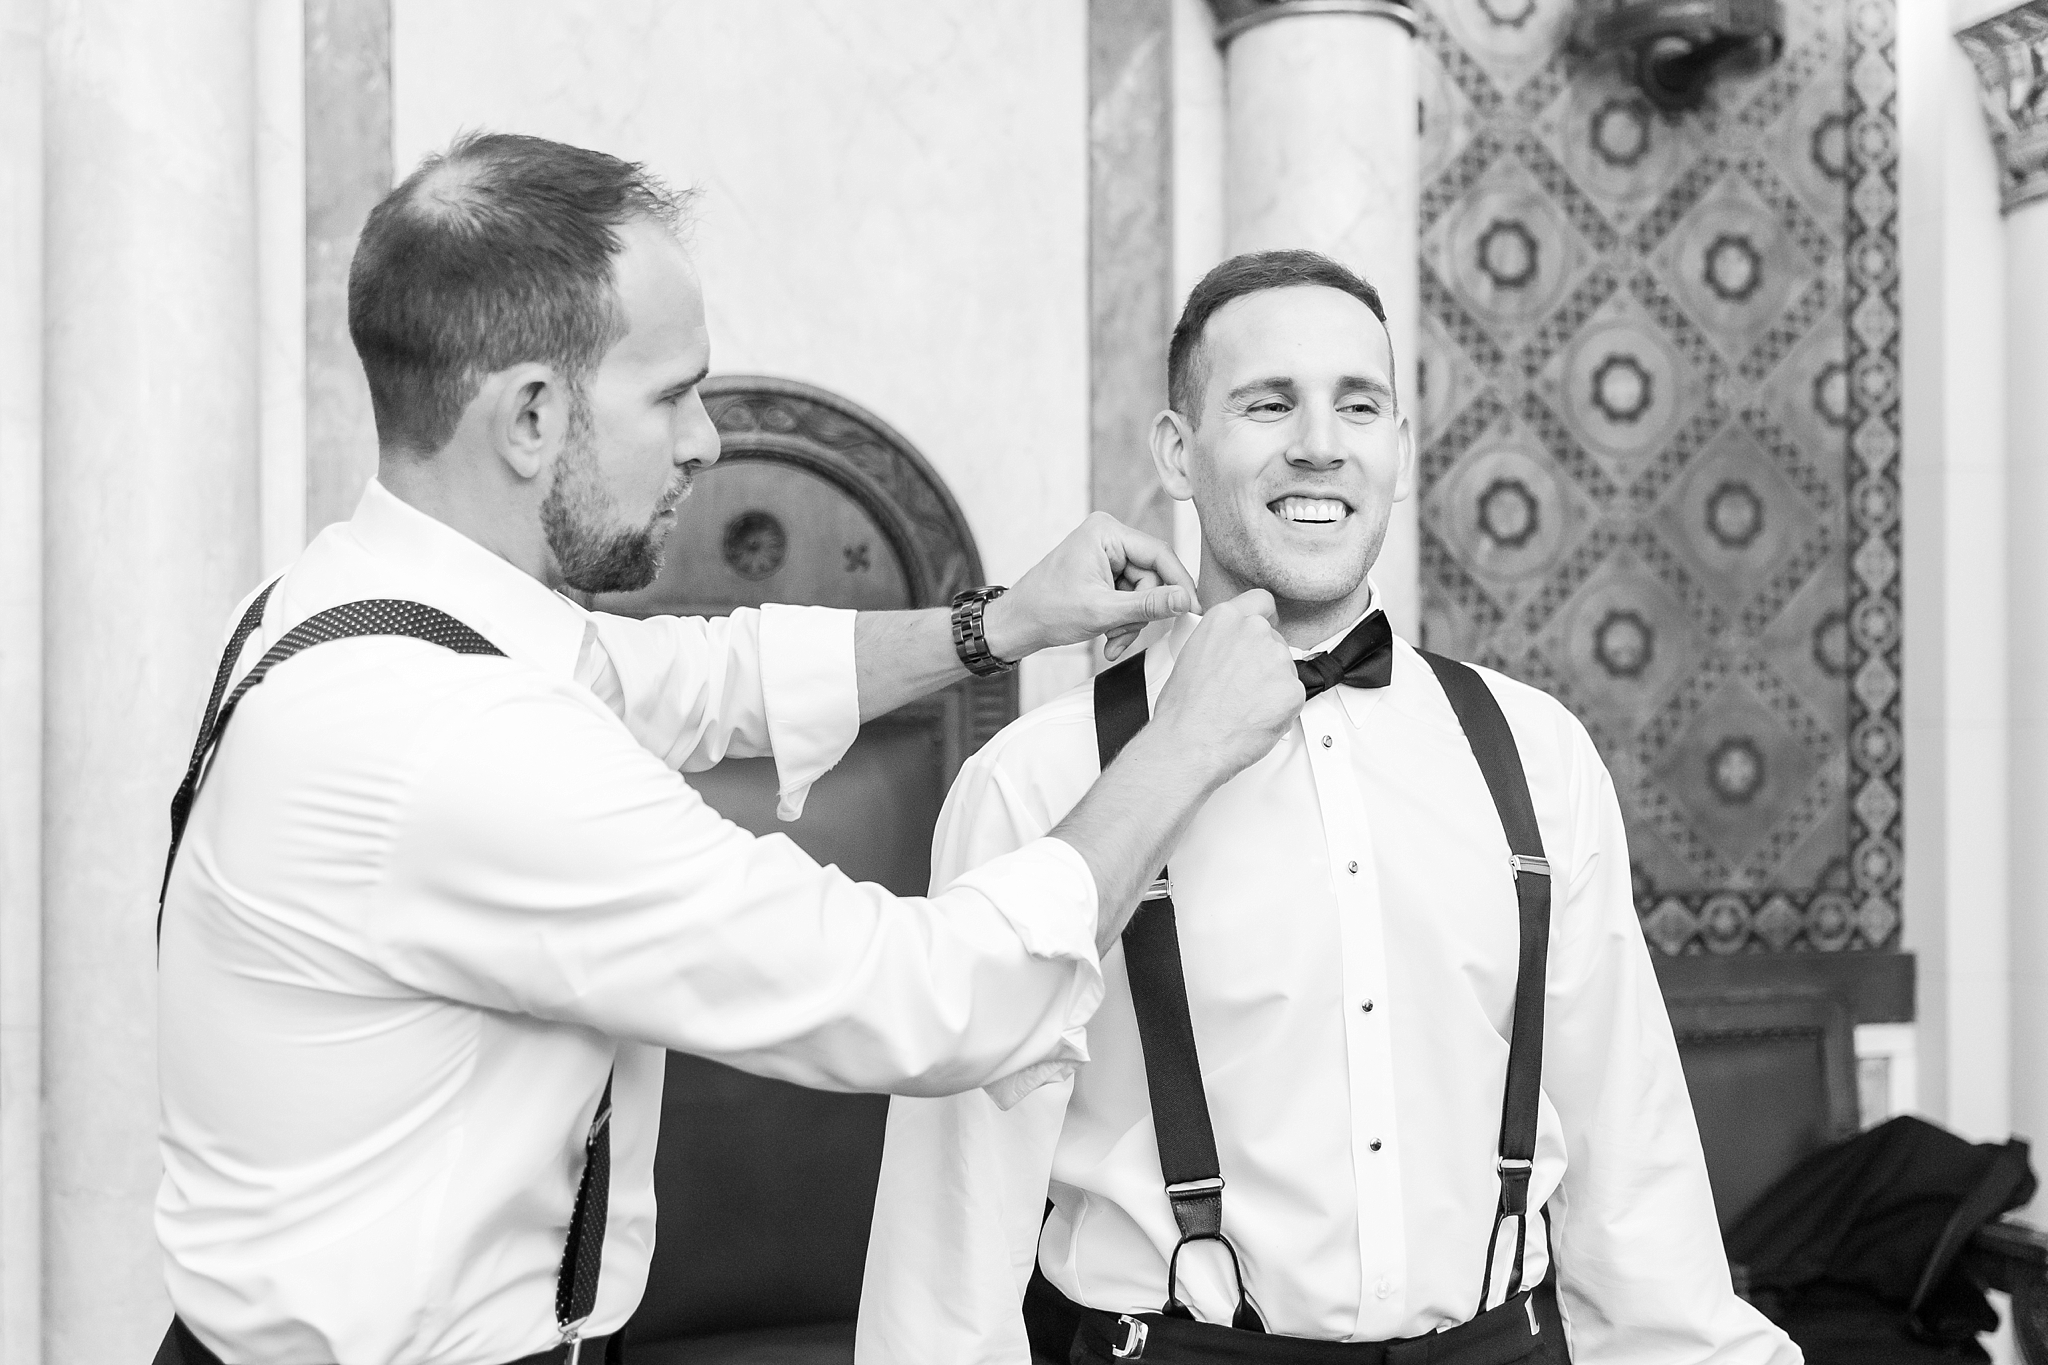 candid-romantic-wedding-photos-at-the-masonic-temple-belle-isle-detroit-institute-of-arts-in-detroit-michigan-by-courtney-carolyn-photography_0004.jpg